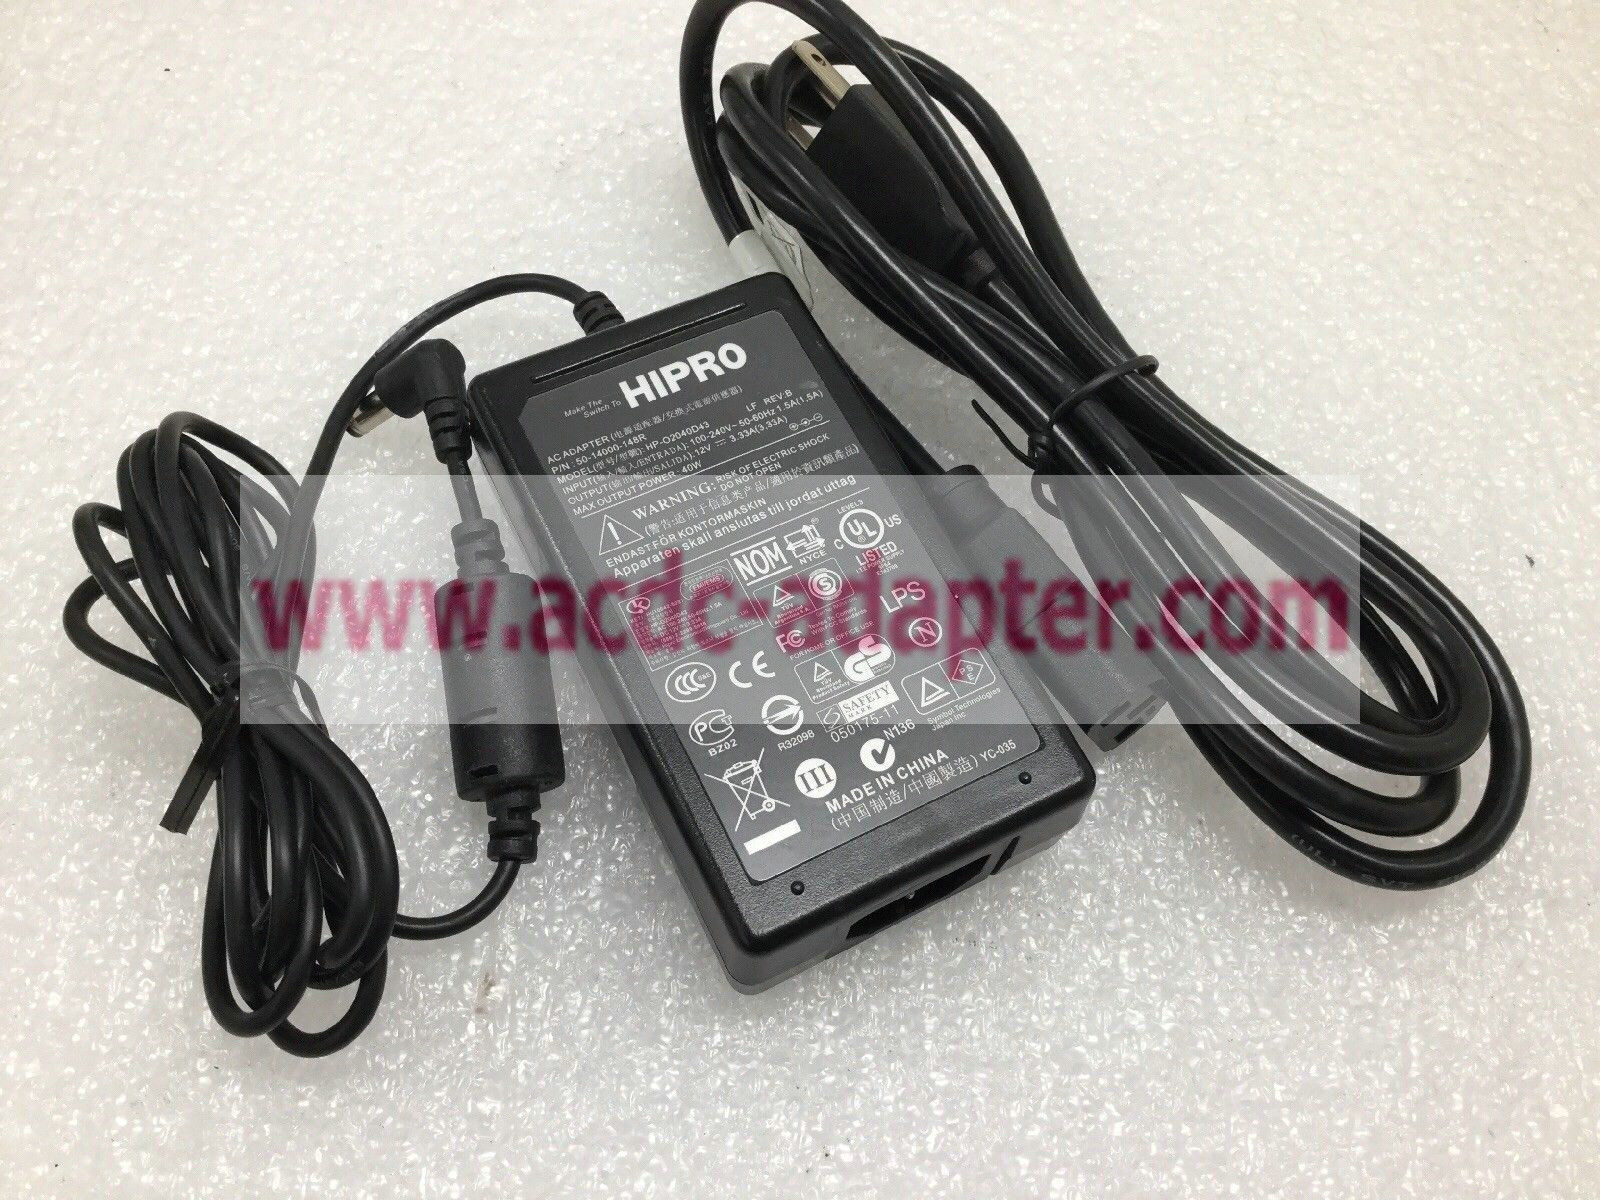 Original Hipro AC Adapter HP-O2040D43 50-14000-148R 16V 3.75A Power Supply Charger